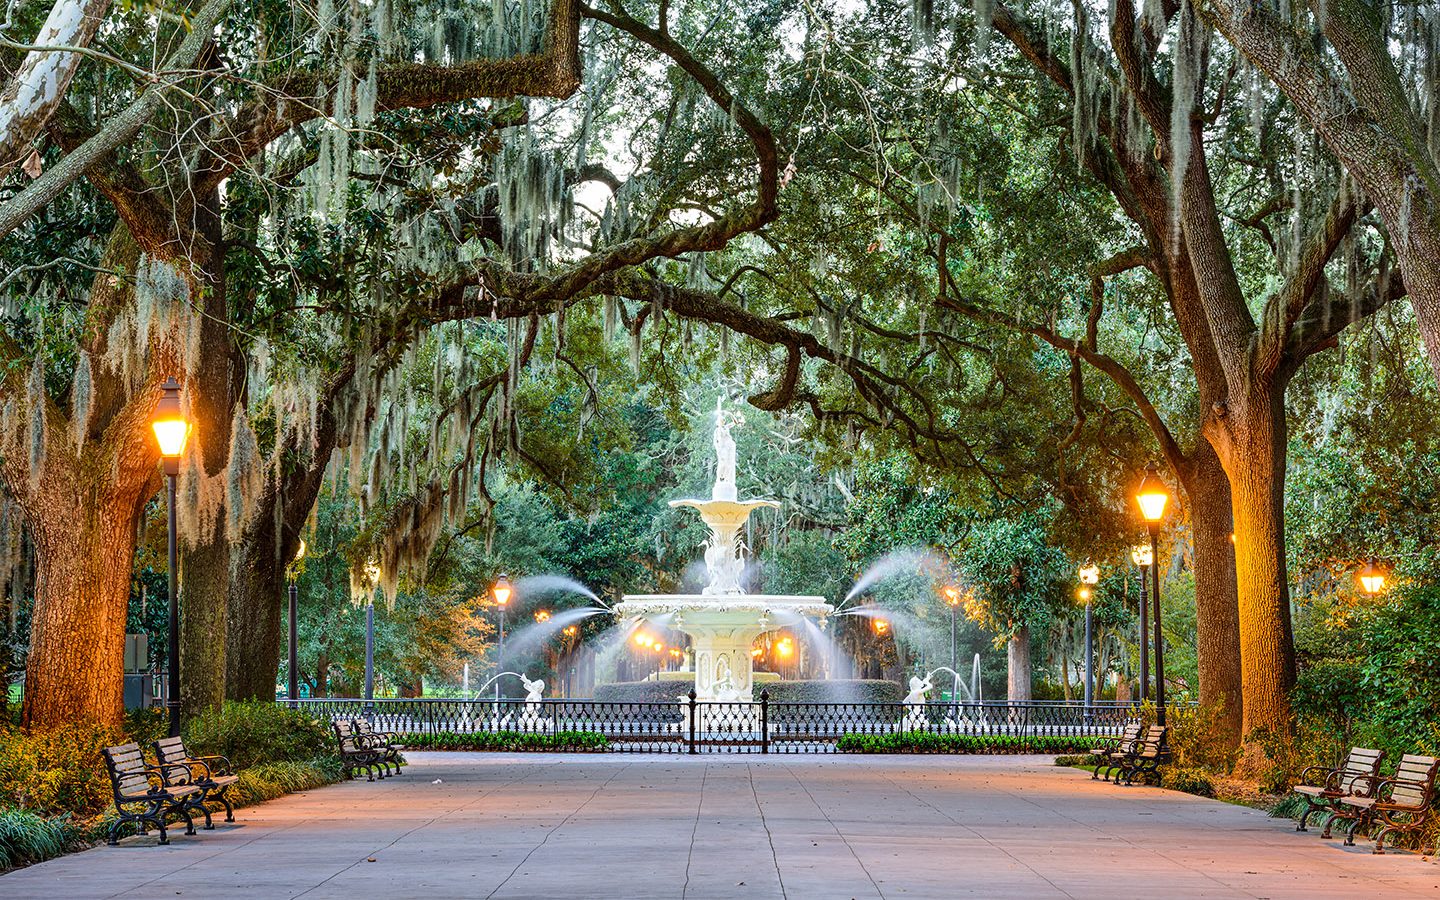 Fountain in Forsyth park, one of the best things to do in Savannah Georgia